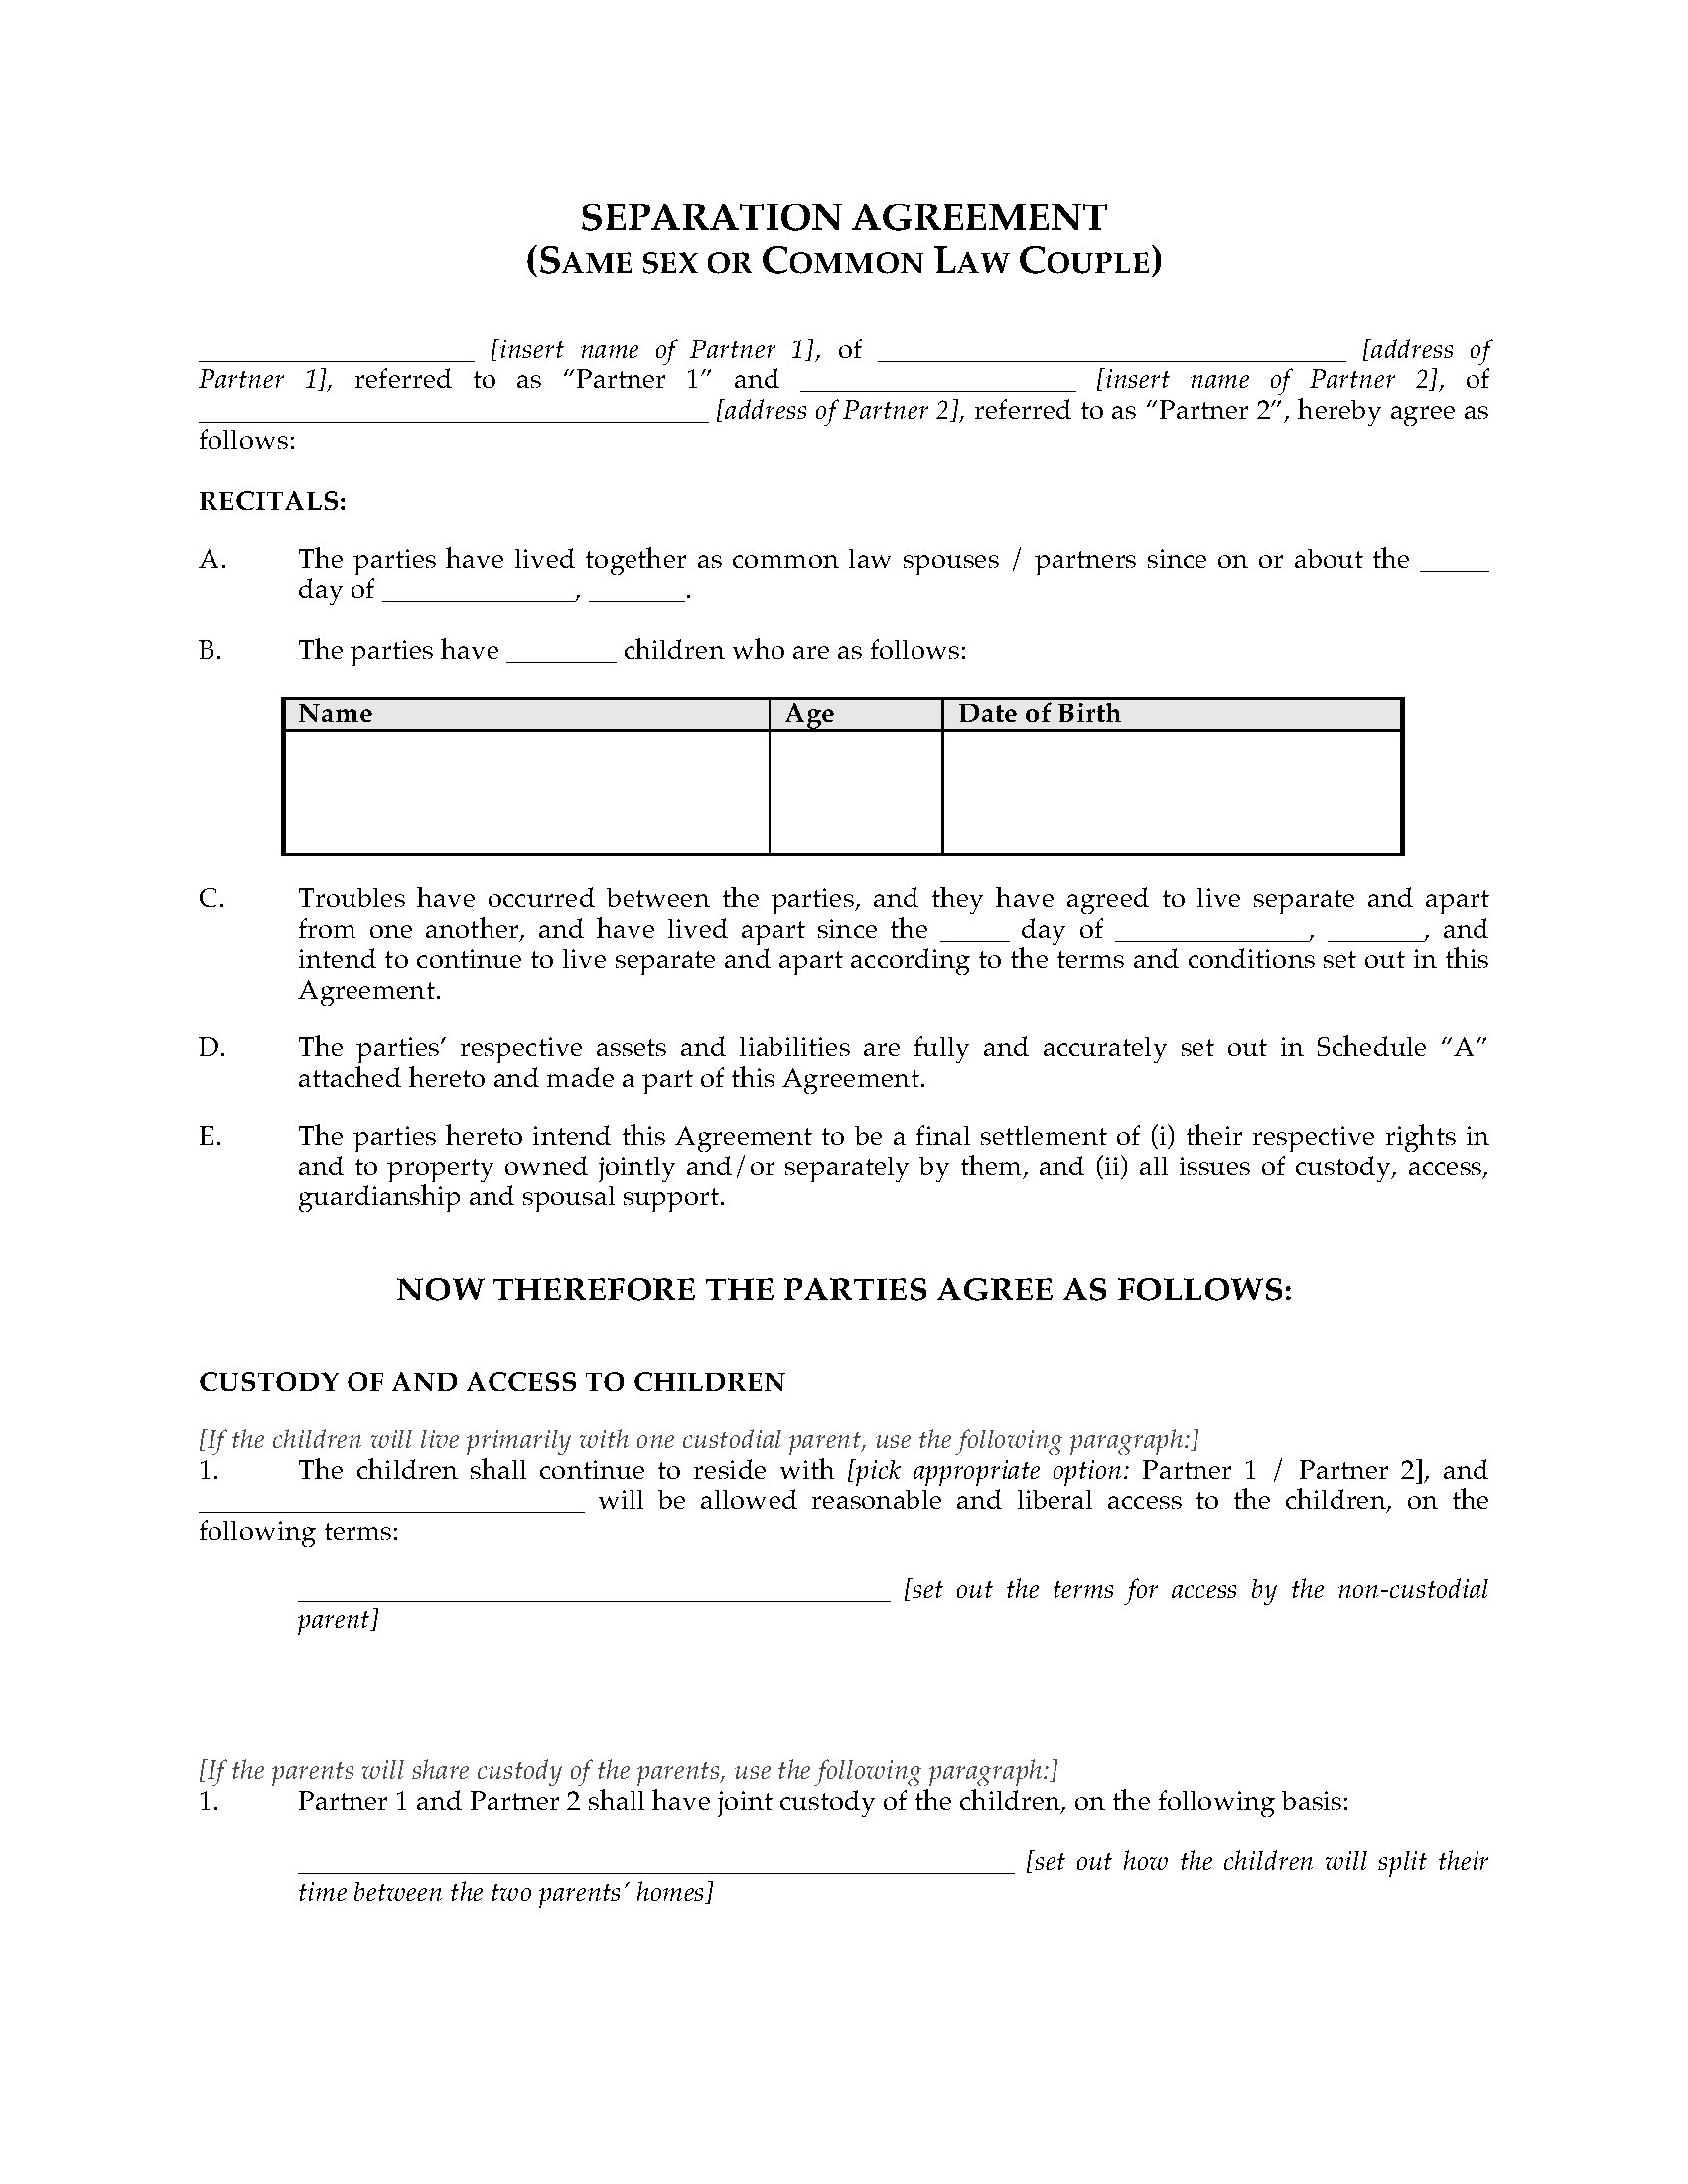 Marriage Termination Agreement Separation Agreements Samples